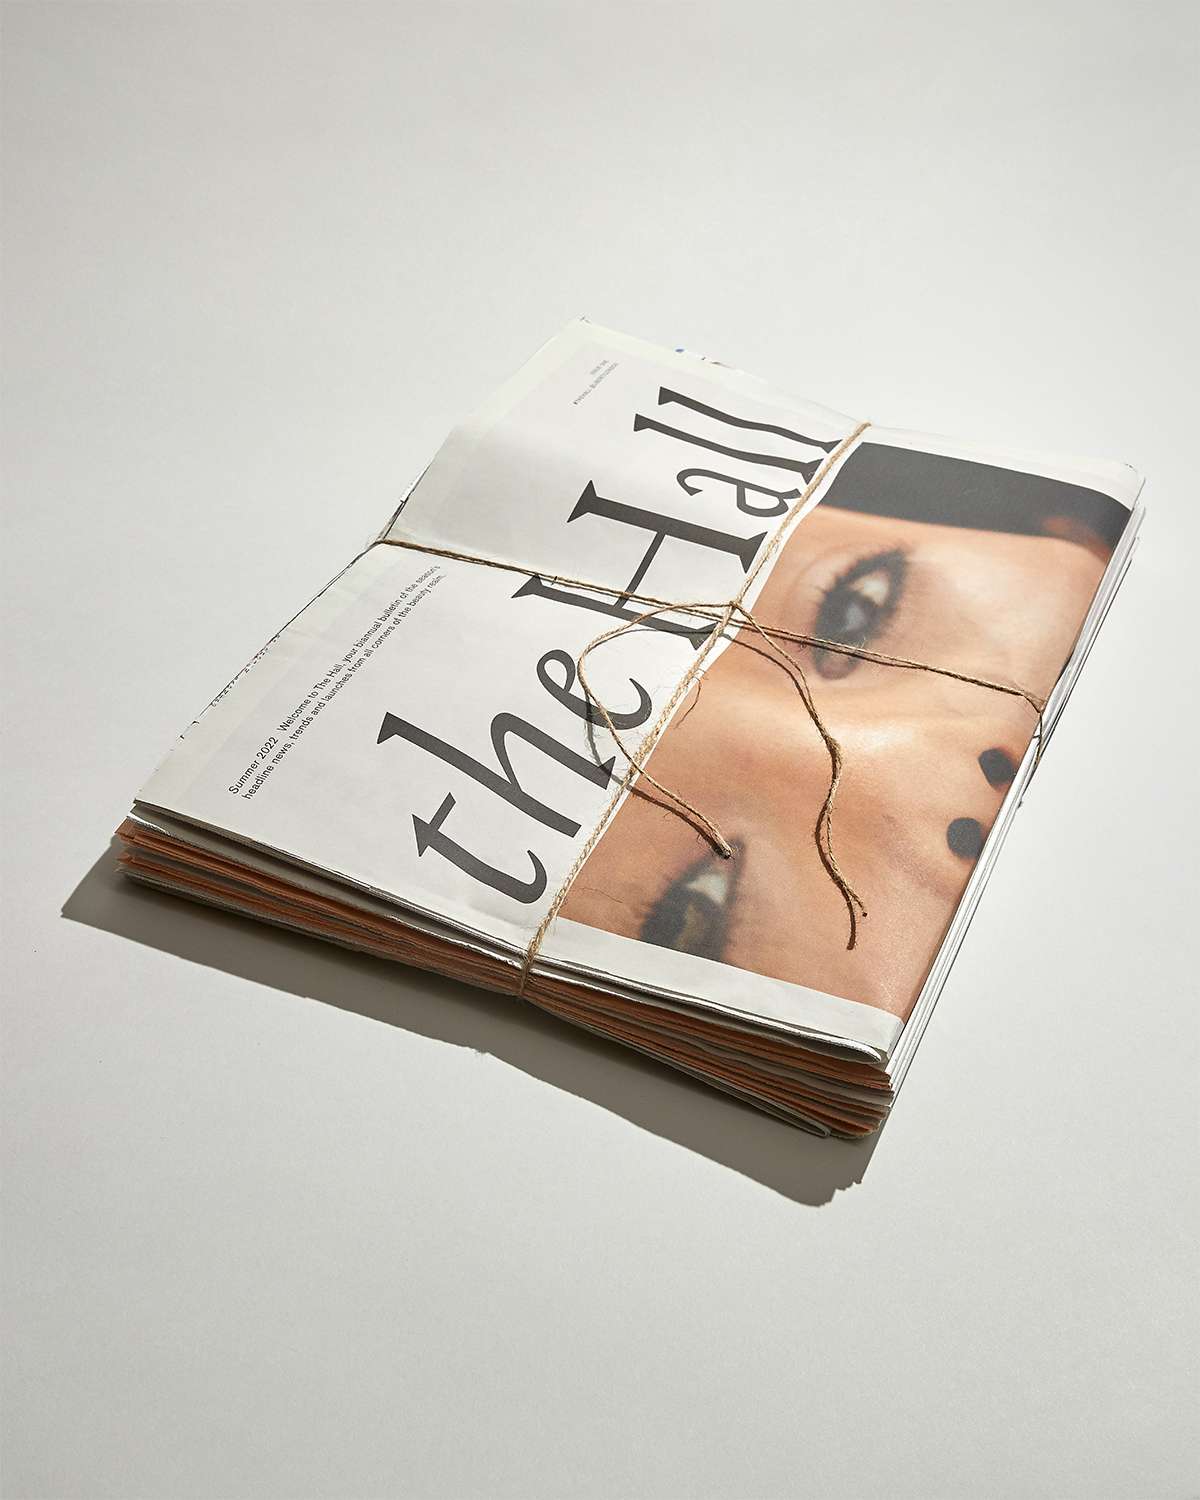 Hot Off the Press: Liberty's New Beauty Newspaper